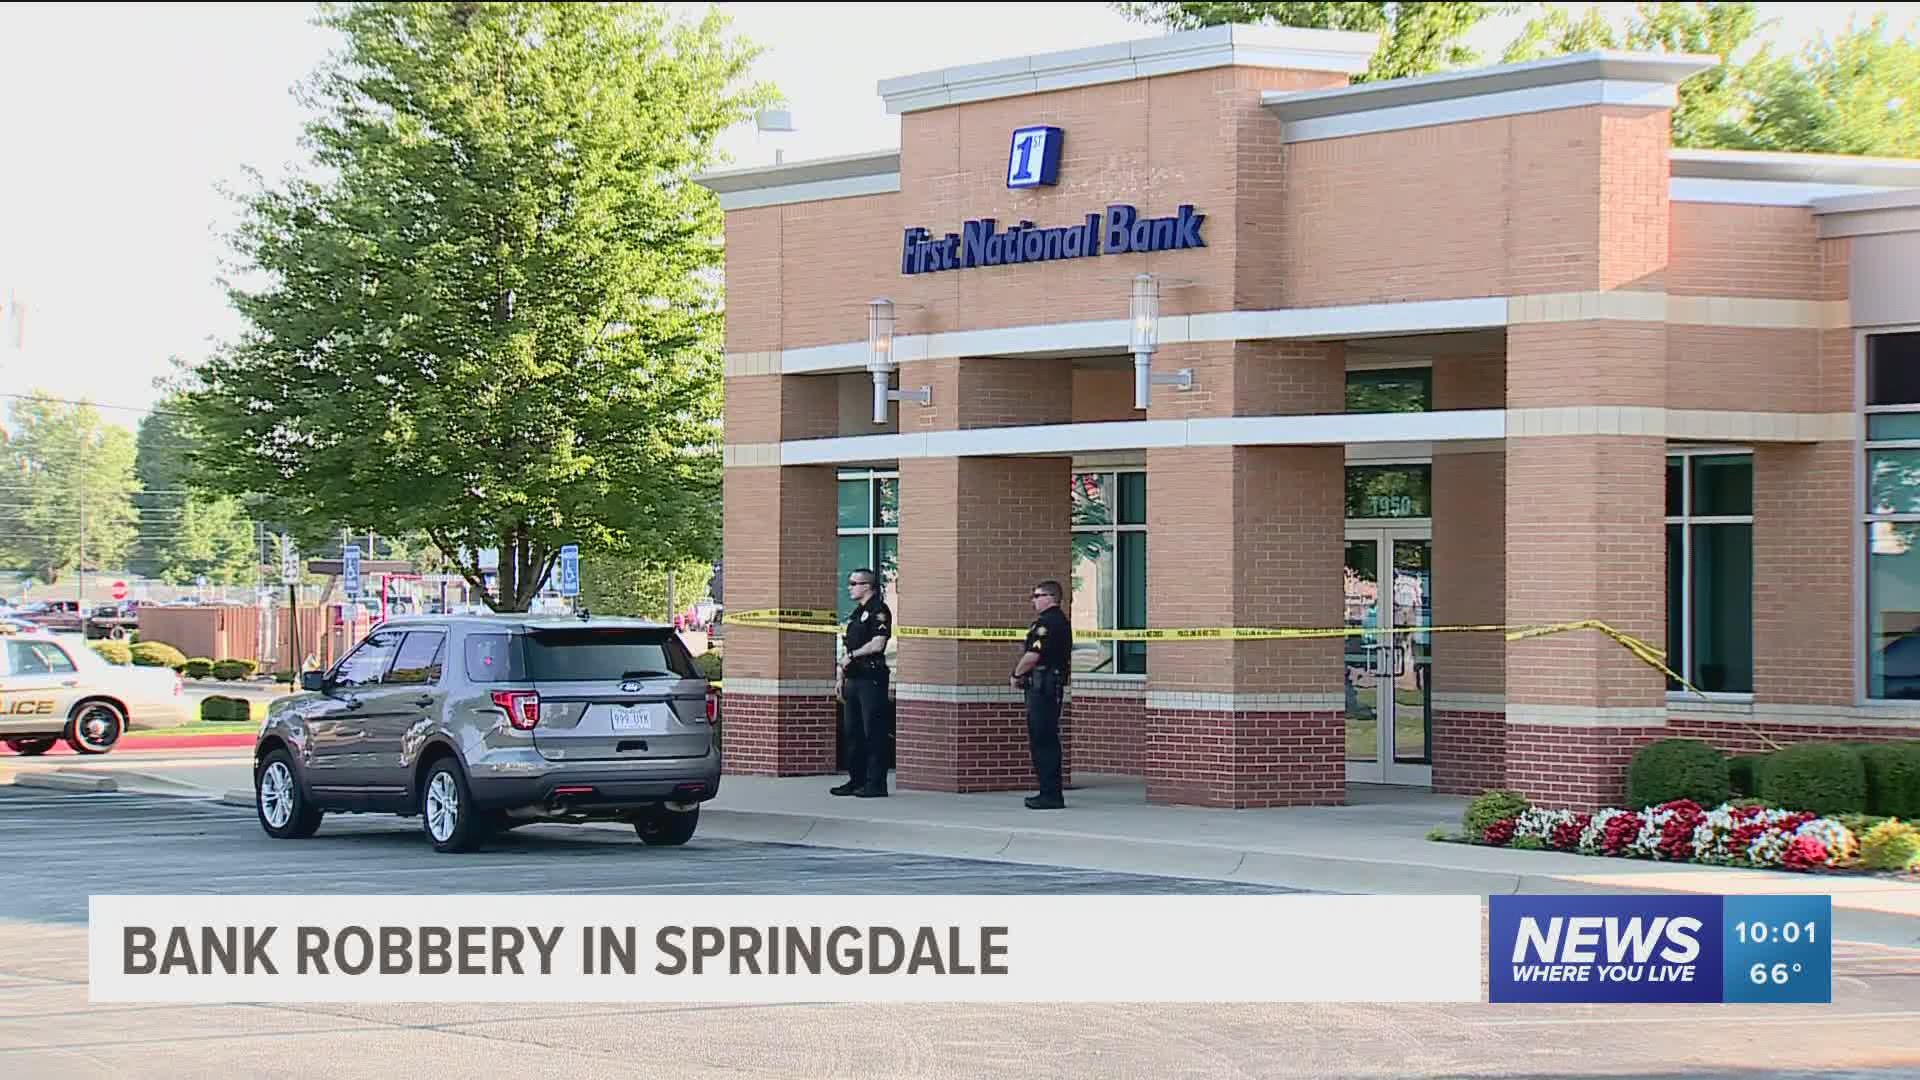 Police are searching for a suspect(s) they say robbed a bank in Springdale on Tuesday. https://bit.ly/31ovBky